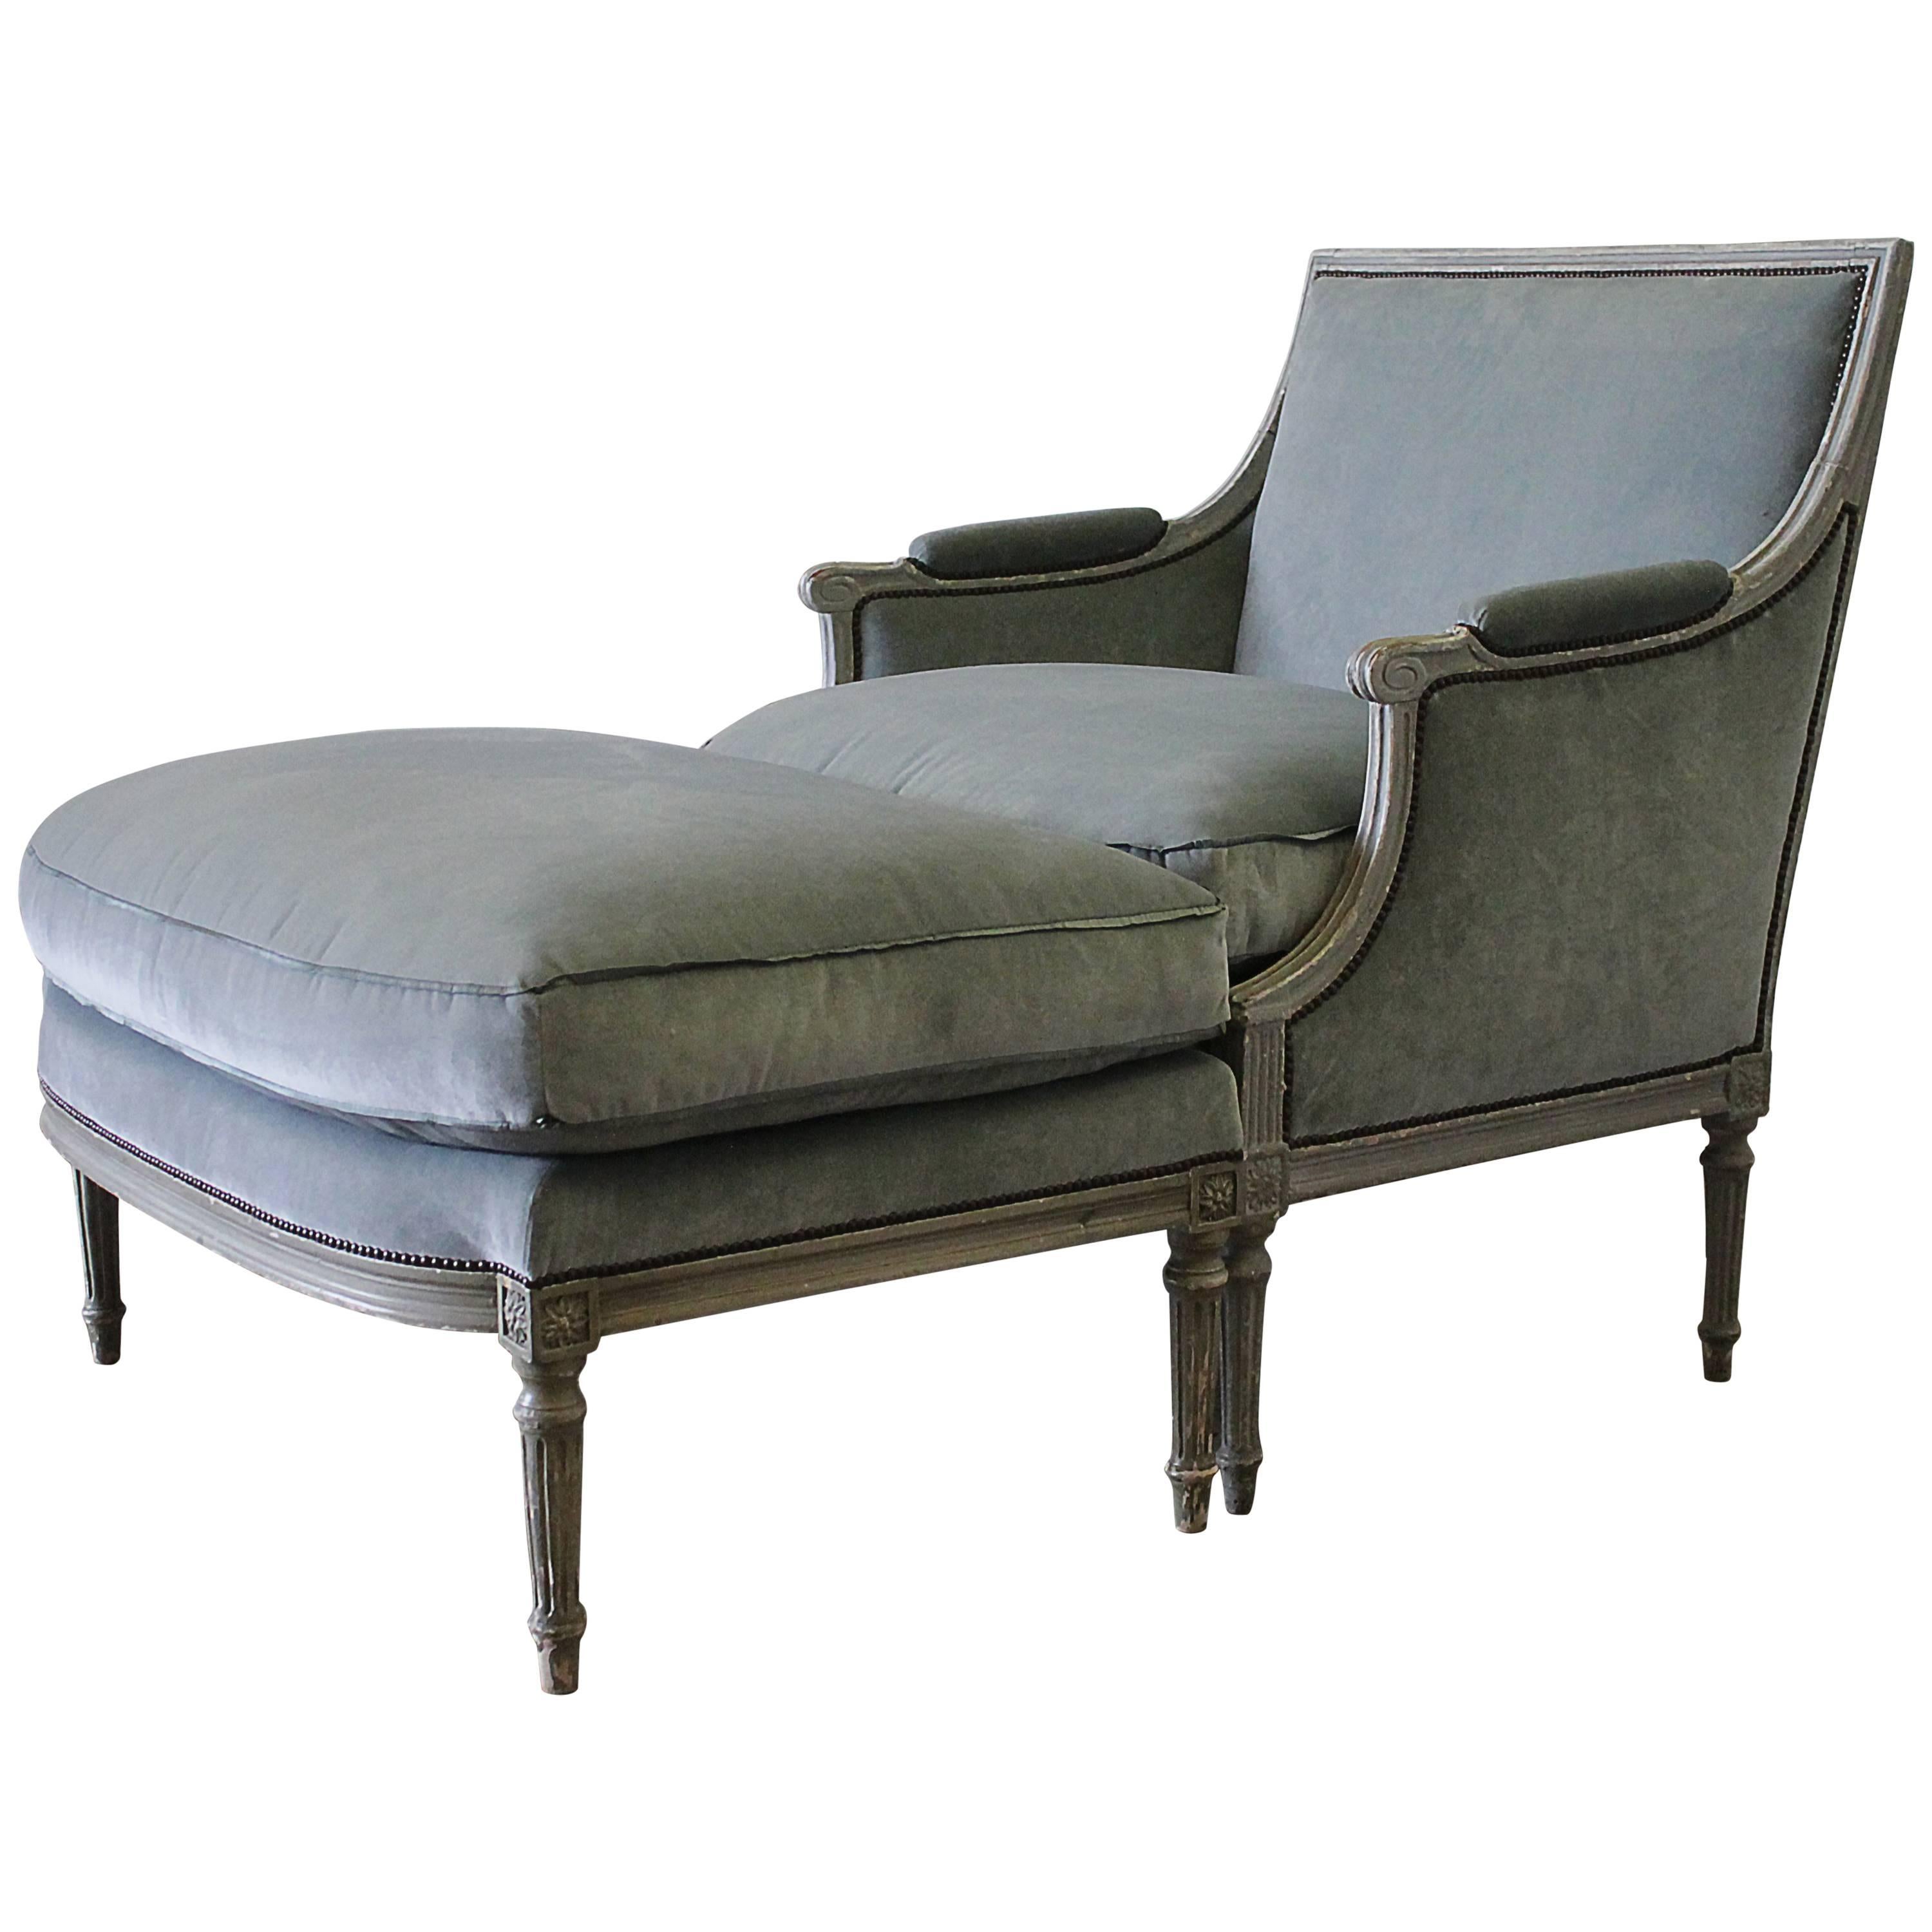 Early 20th Century Painted and Upholstered Louis XVI Chair and Ottoman Chaise